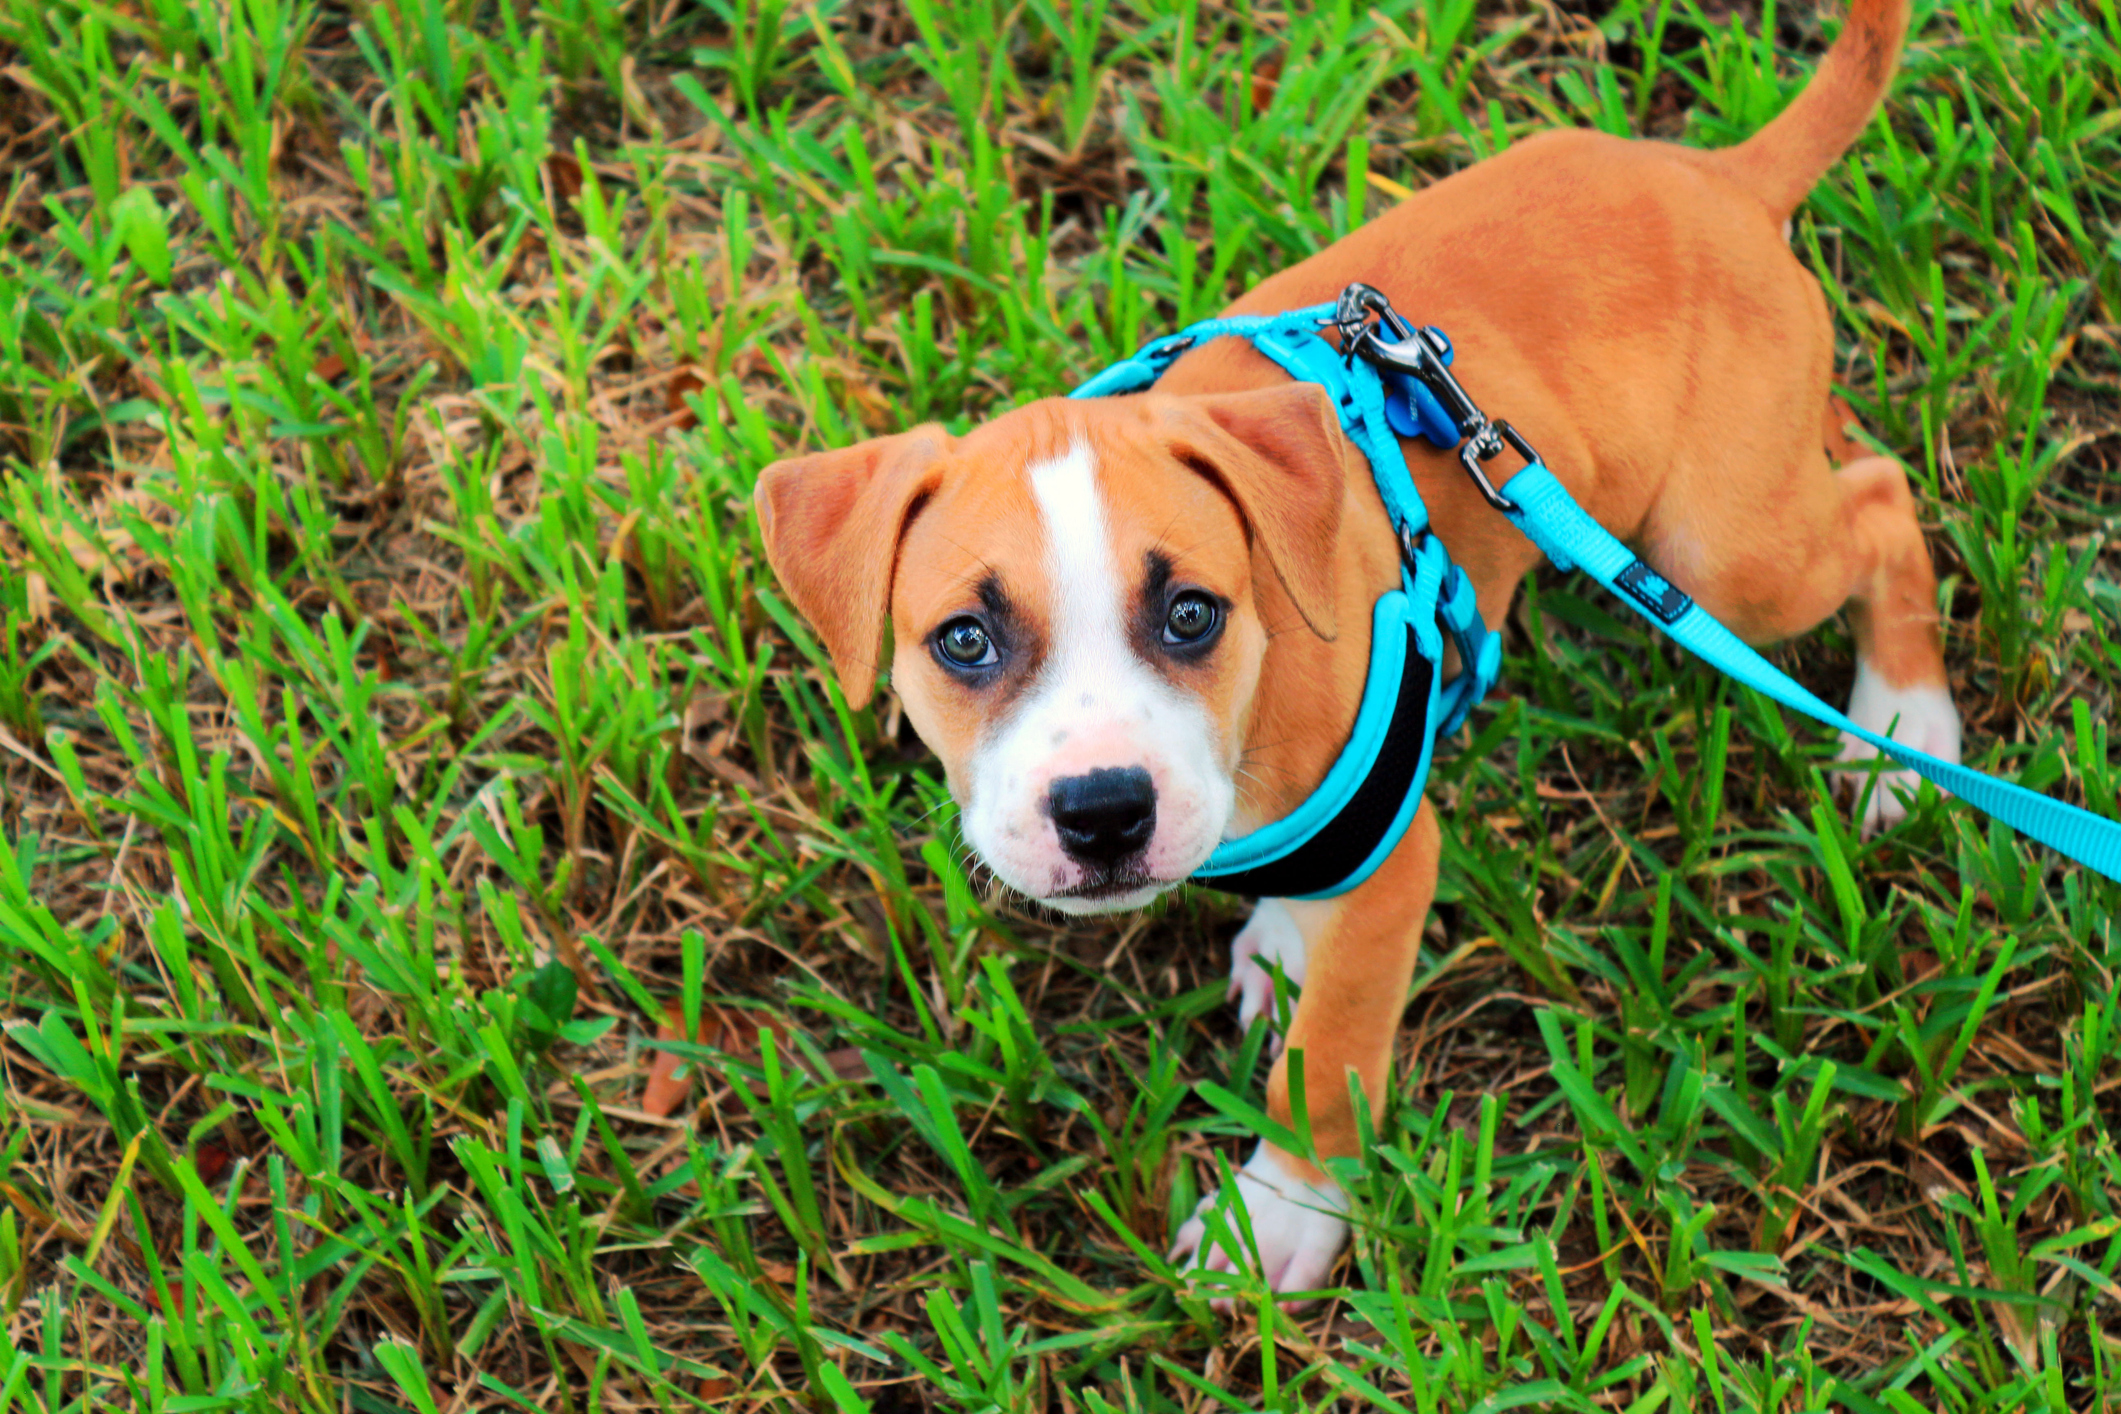 Puppy wearing a harness in the grass.